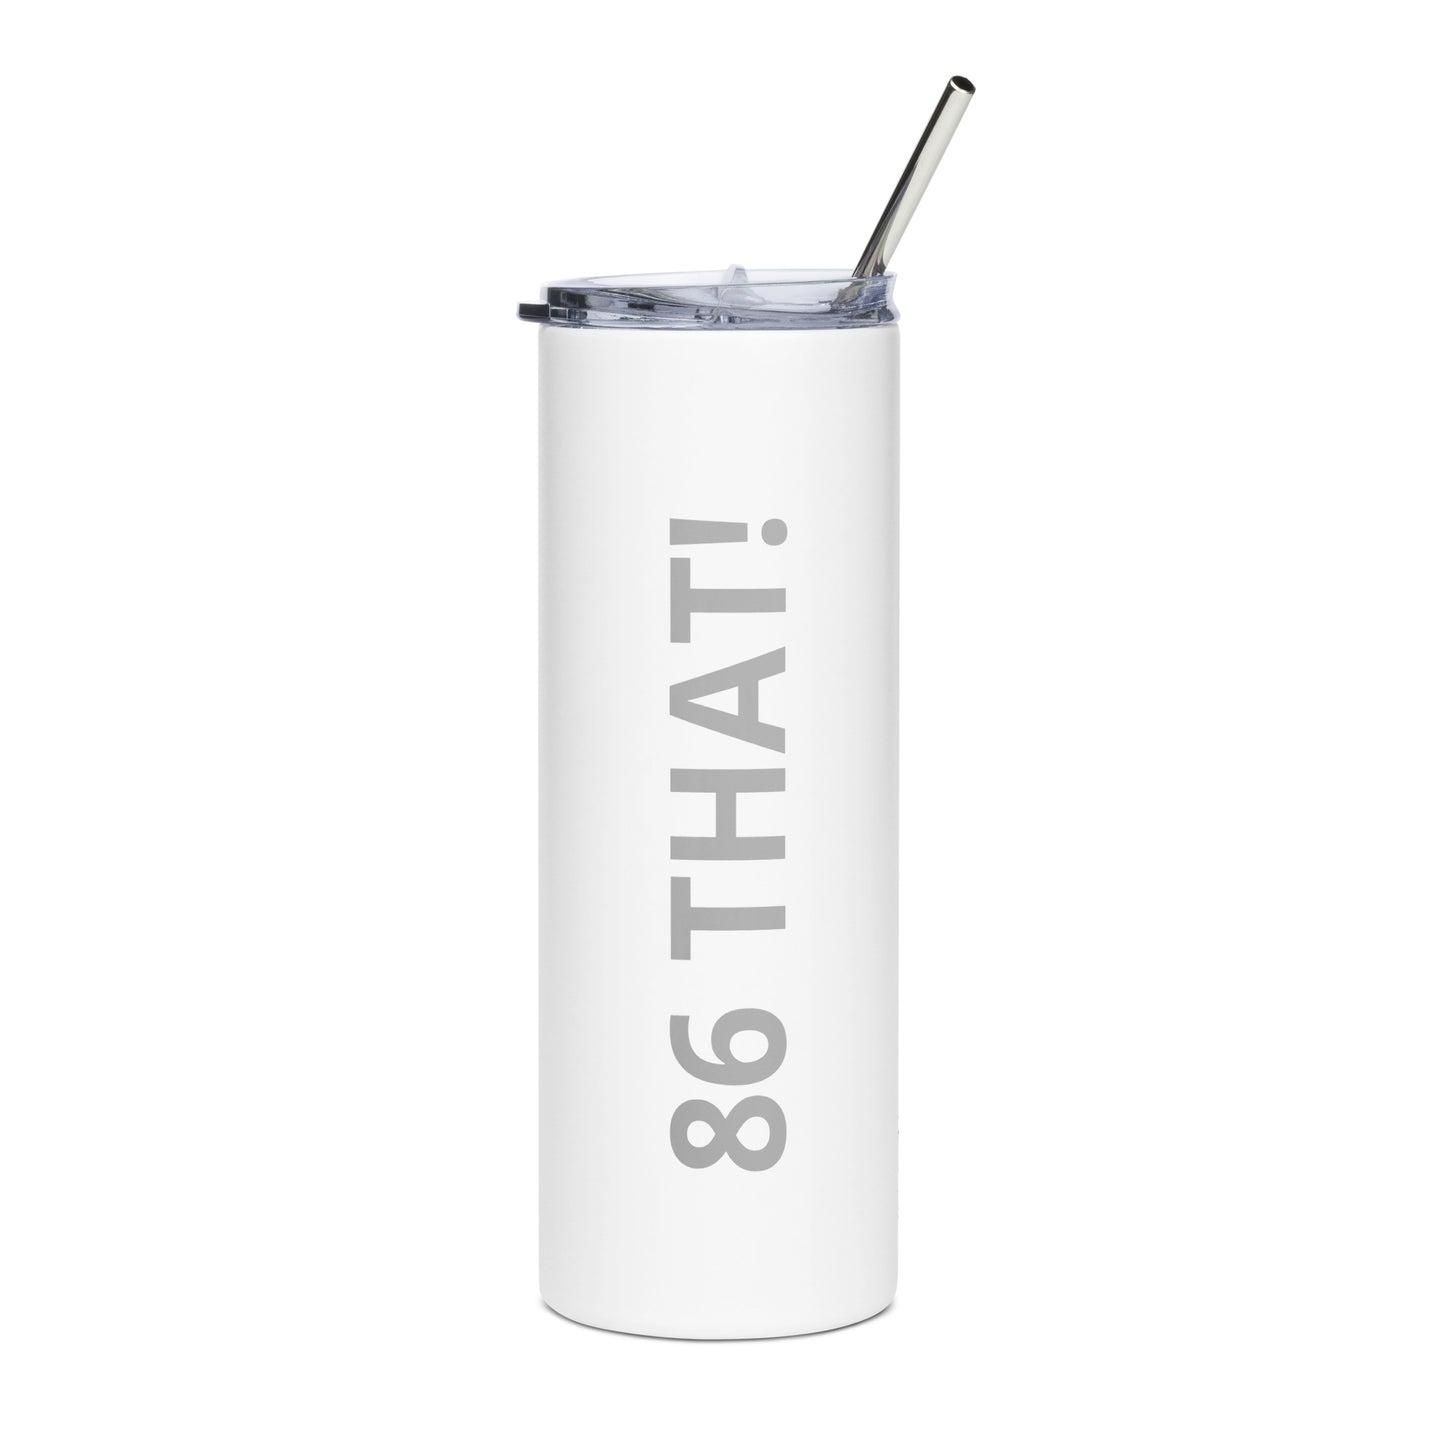 Stainless steel 86 THAT! tumbler